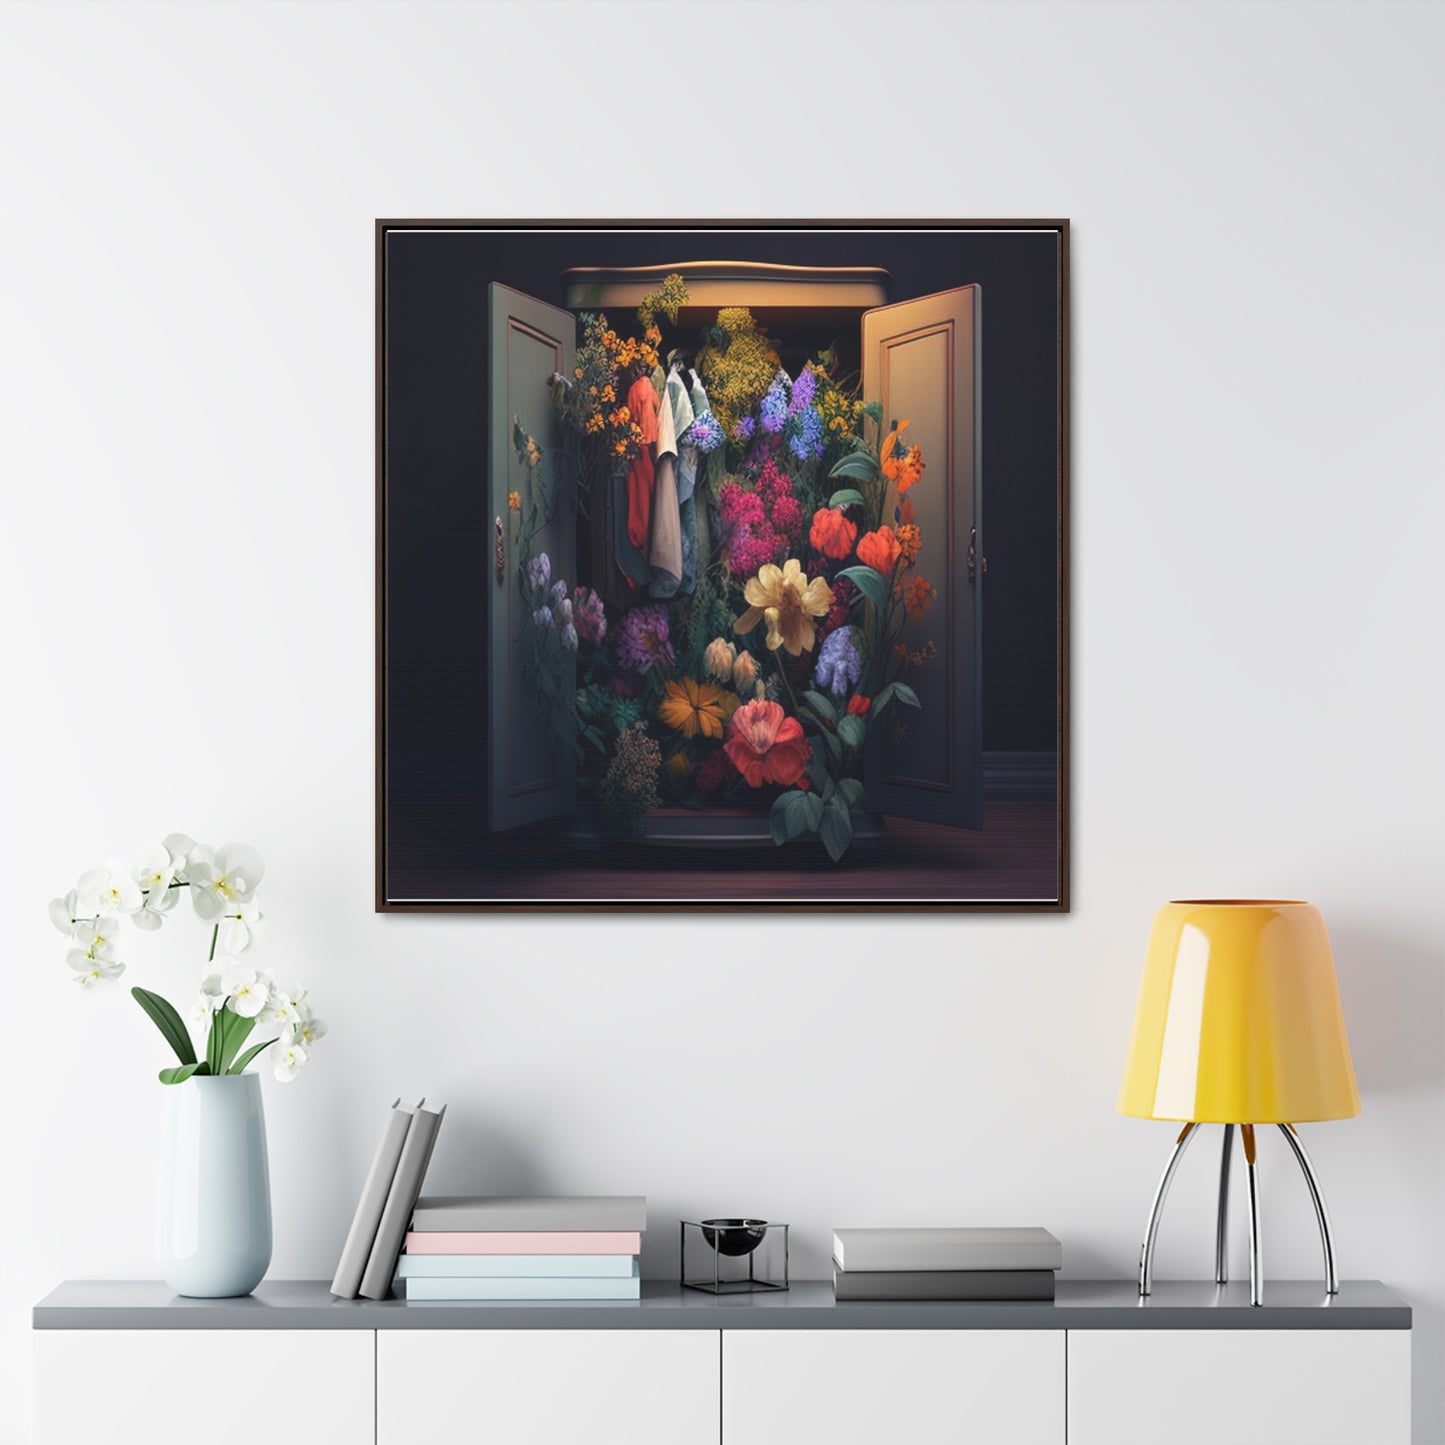 Gallery Canvas Wraps, Square Frame A Wardrobe Surrounded by Flowers 4